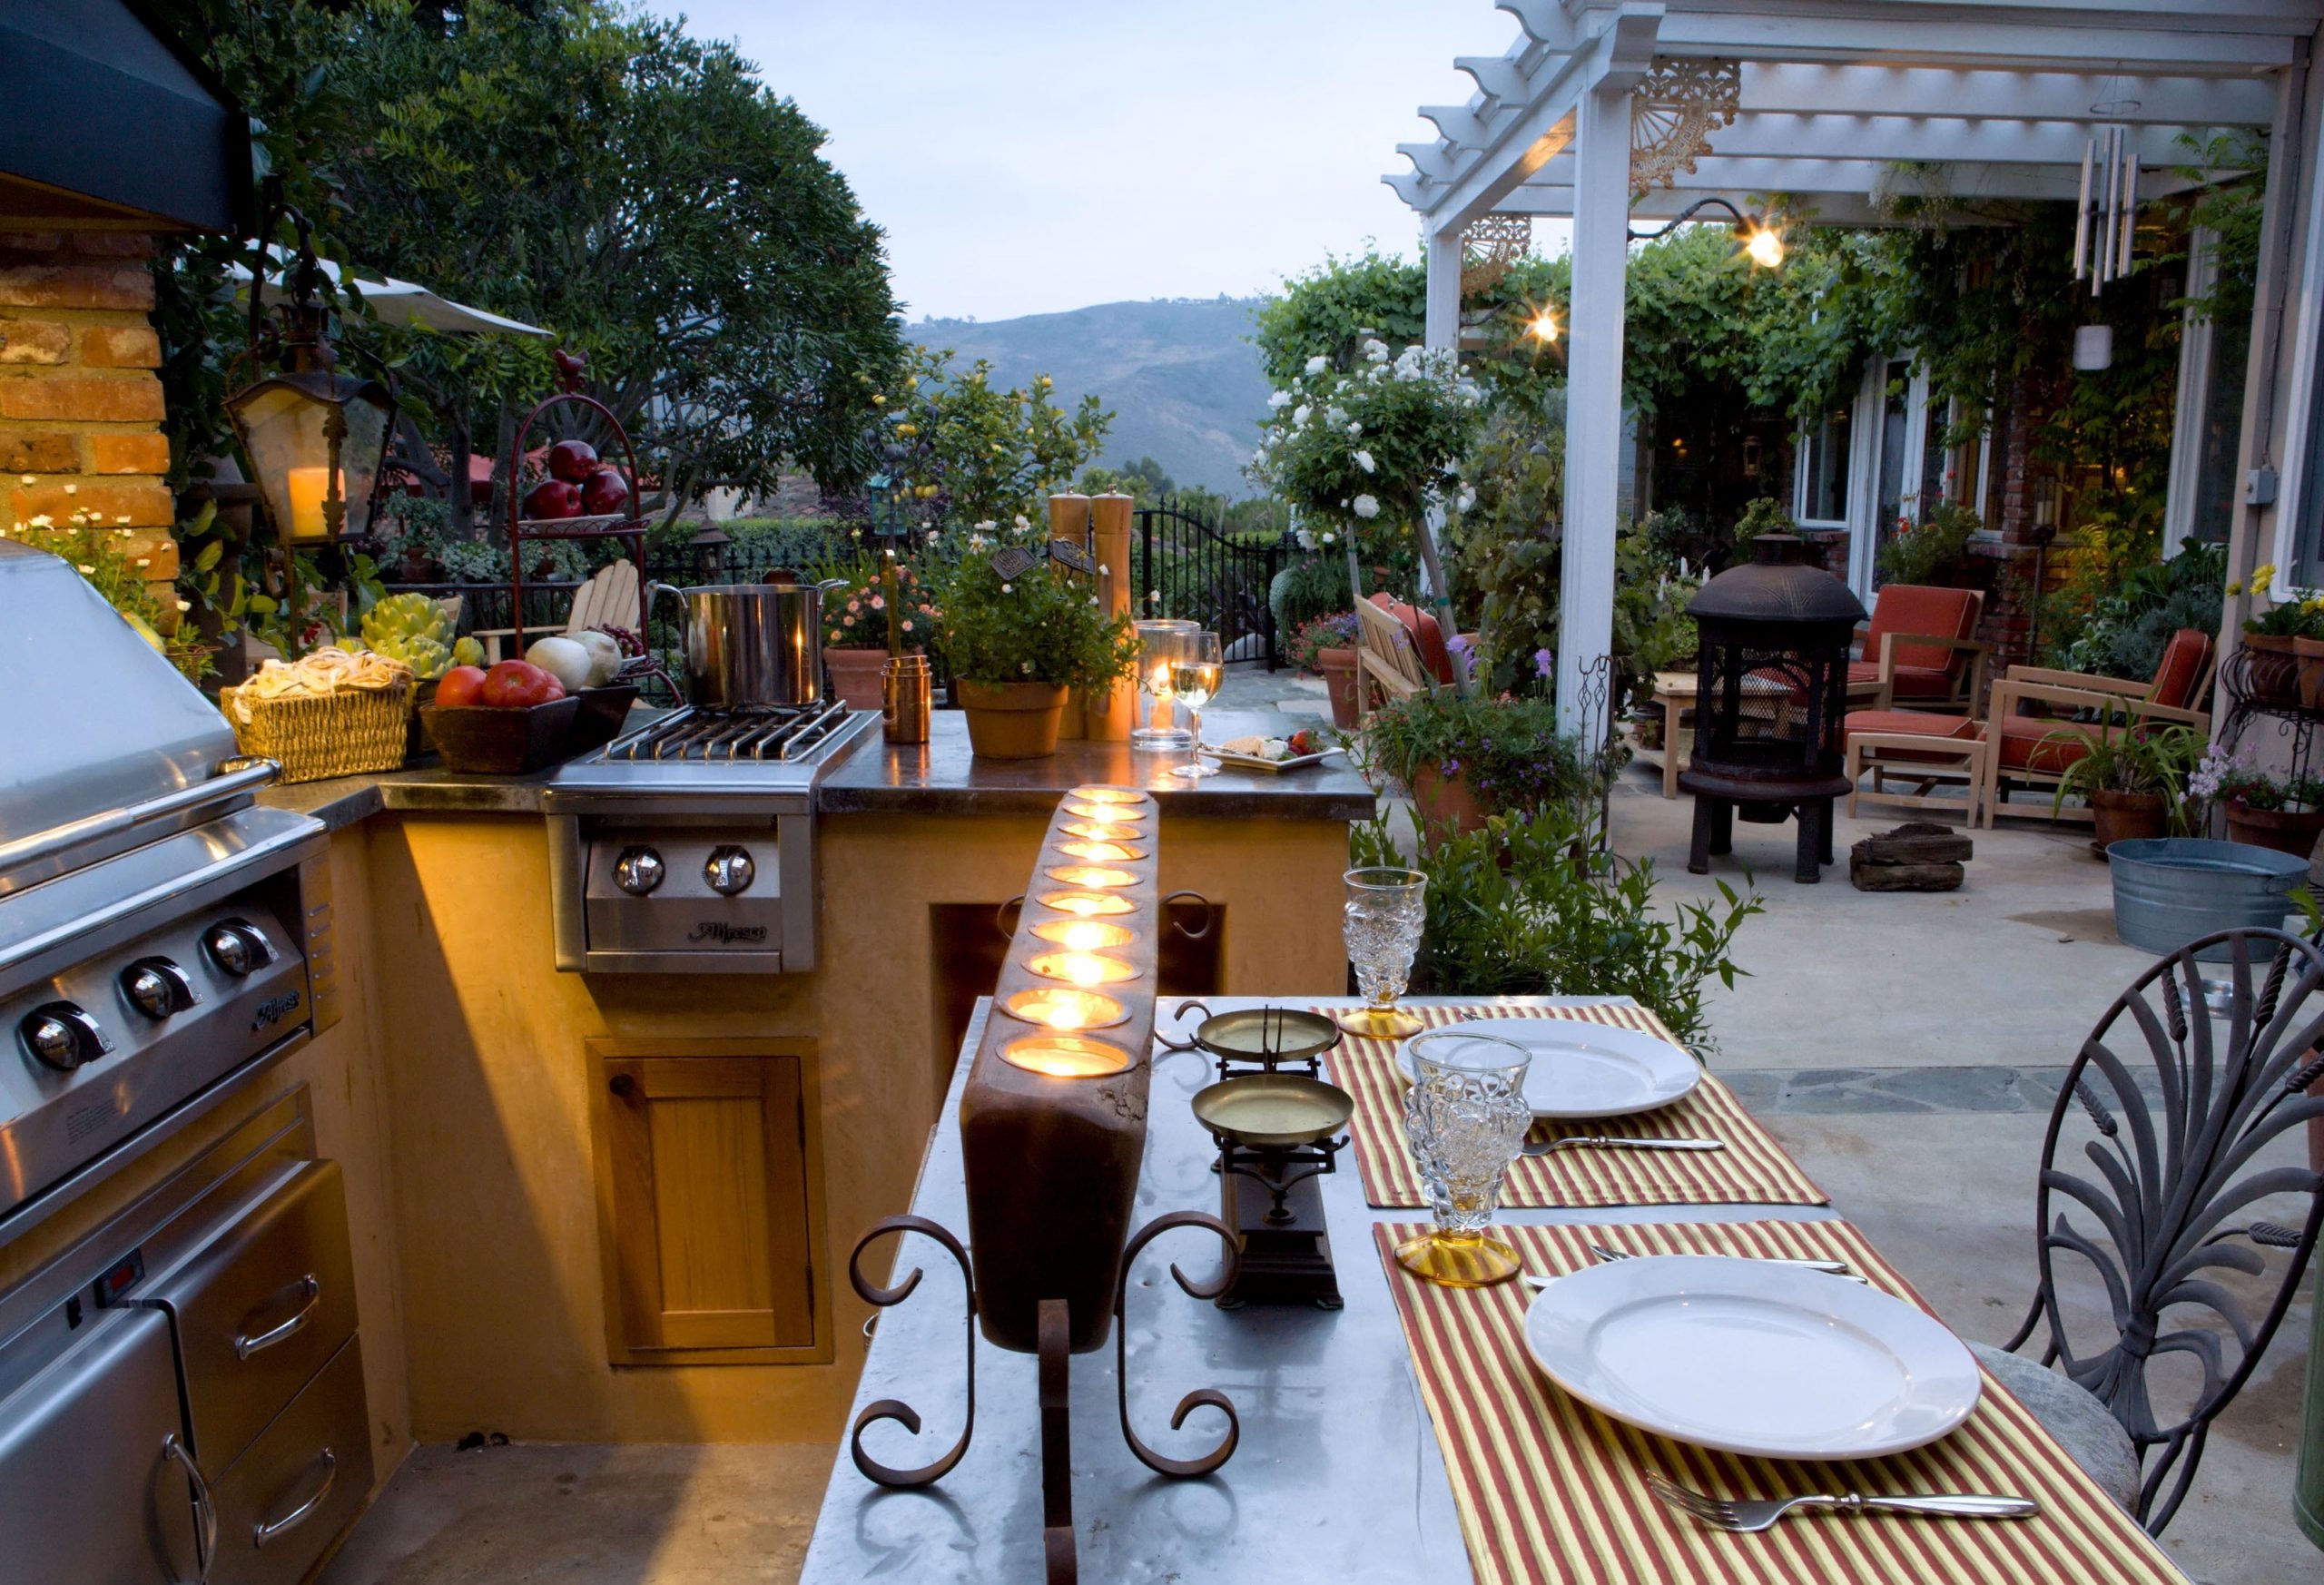 Outdoor Kitchen Must-Haves - Top 20 Things to Have